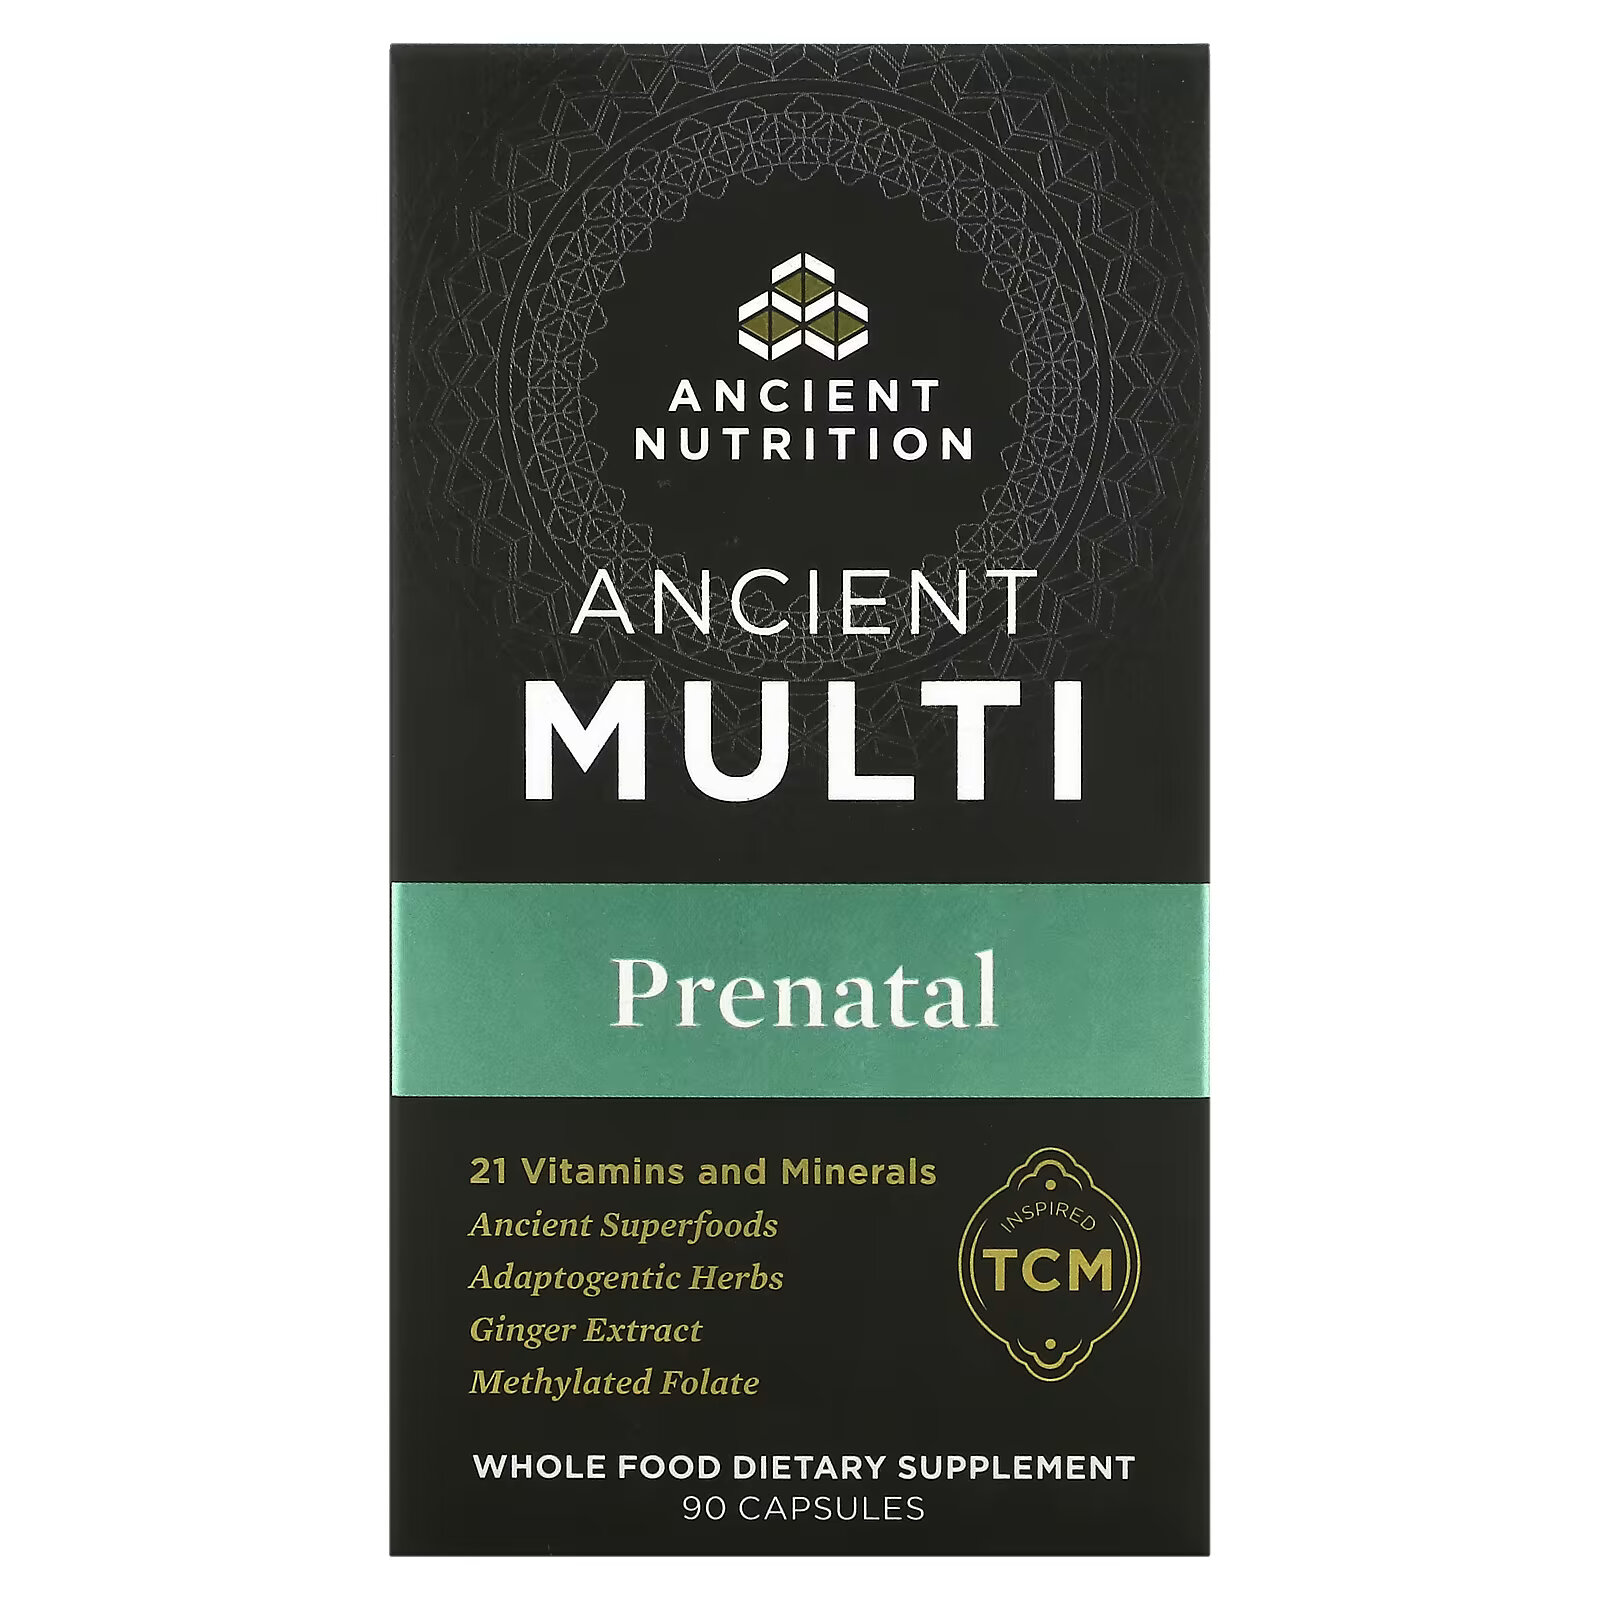 dr axe ancient nutrition ancient multi для иммунитета 90 капсул Dr. Axe / Ancient Nutrition, Ancient Multi Prenatal, 90 капсул